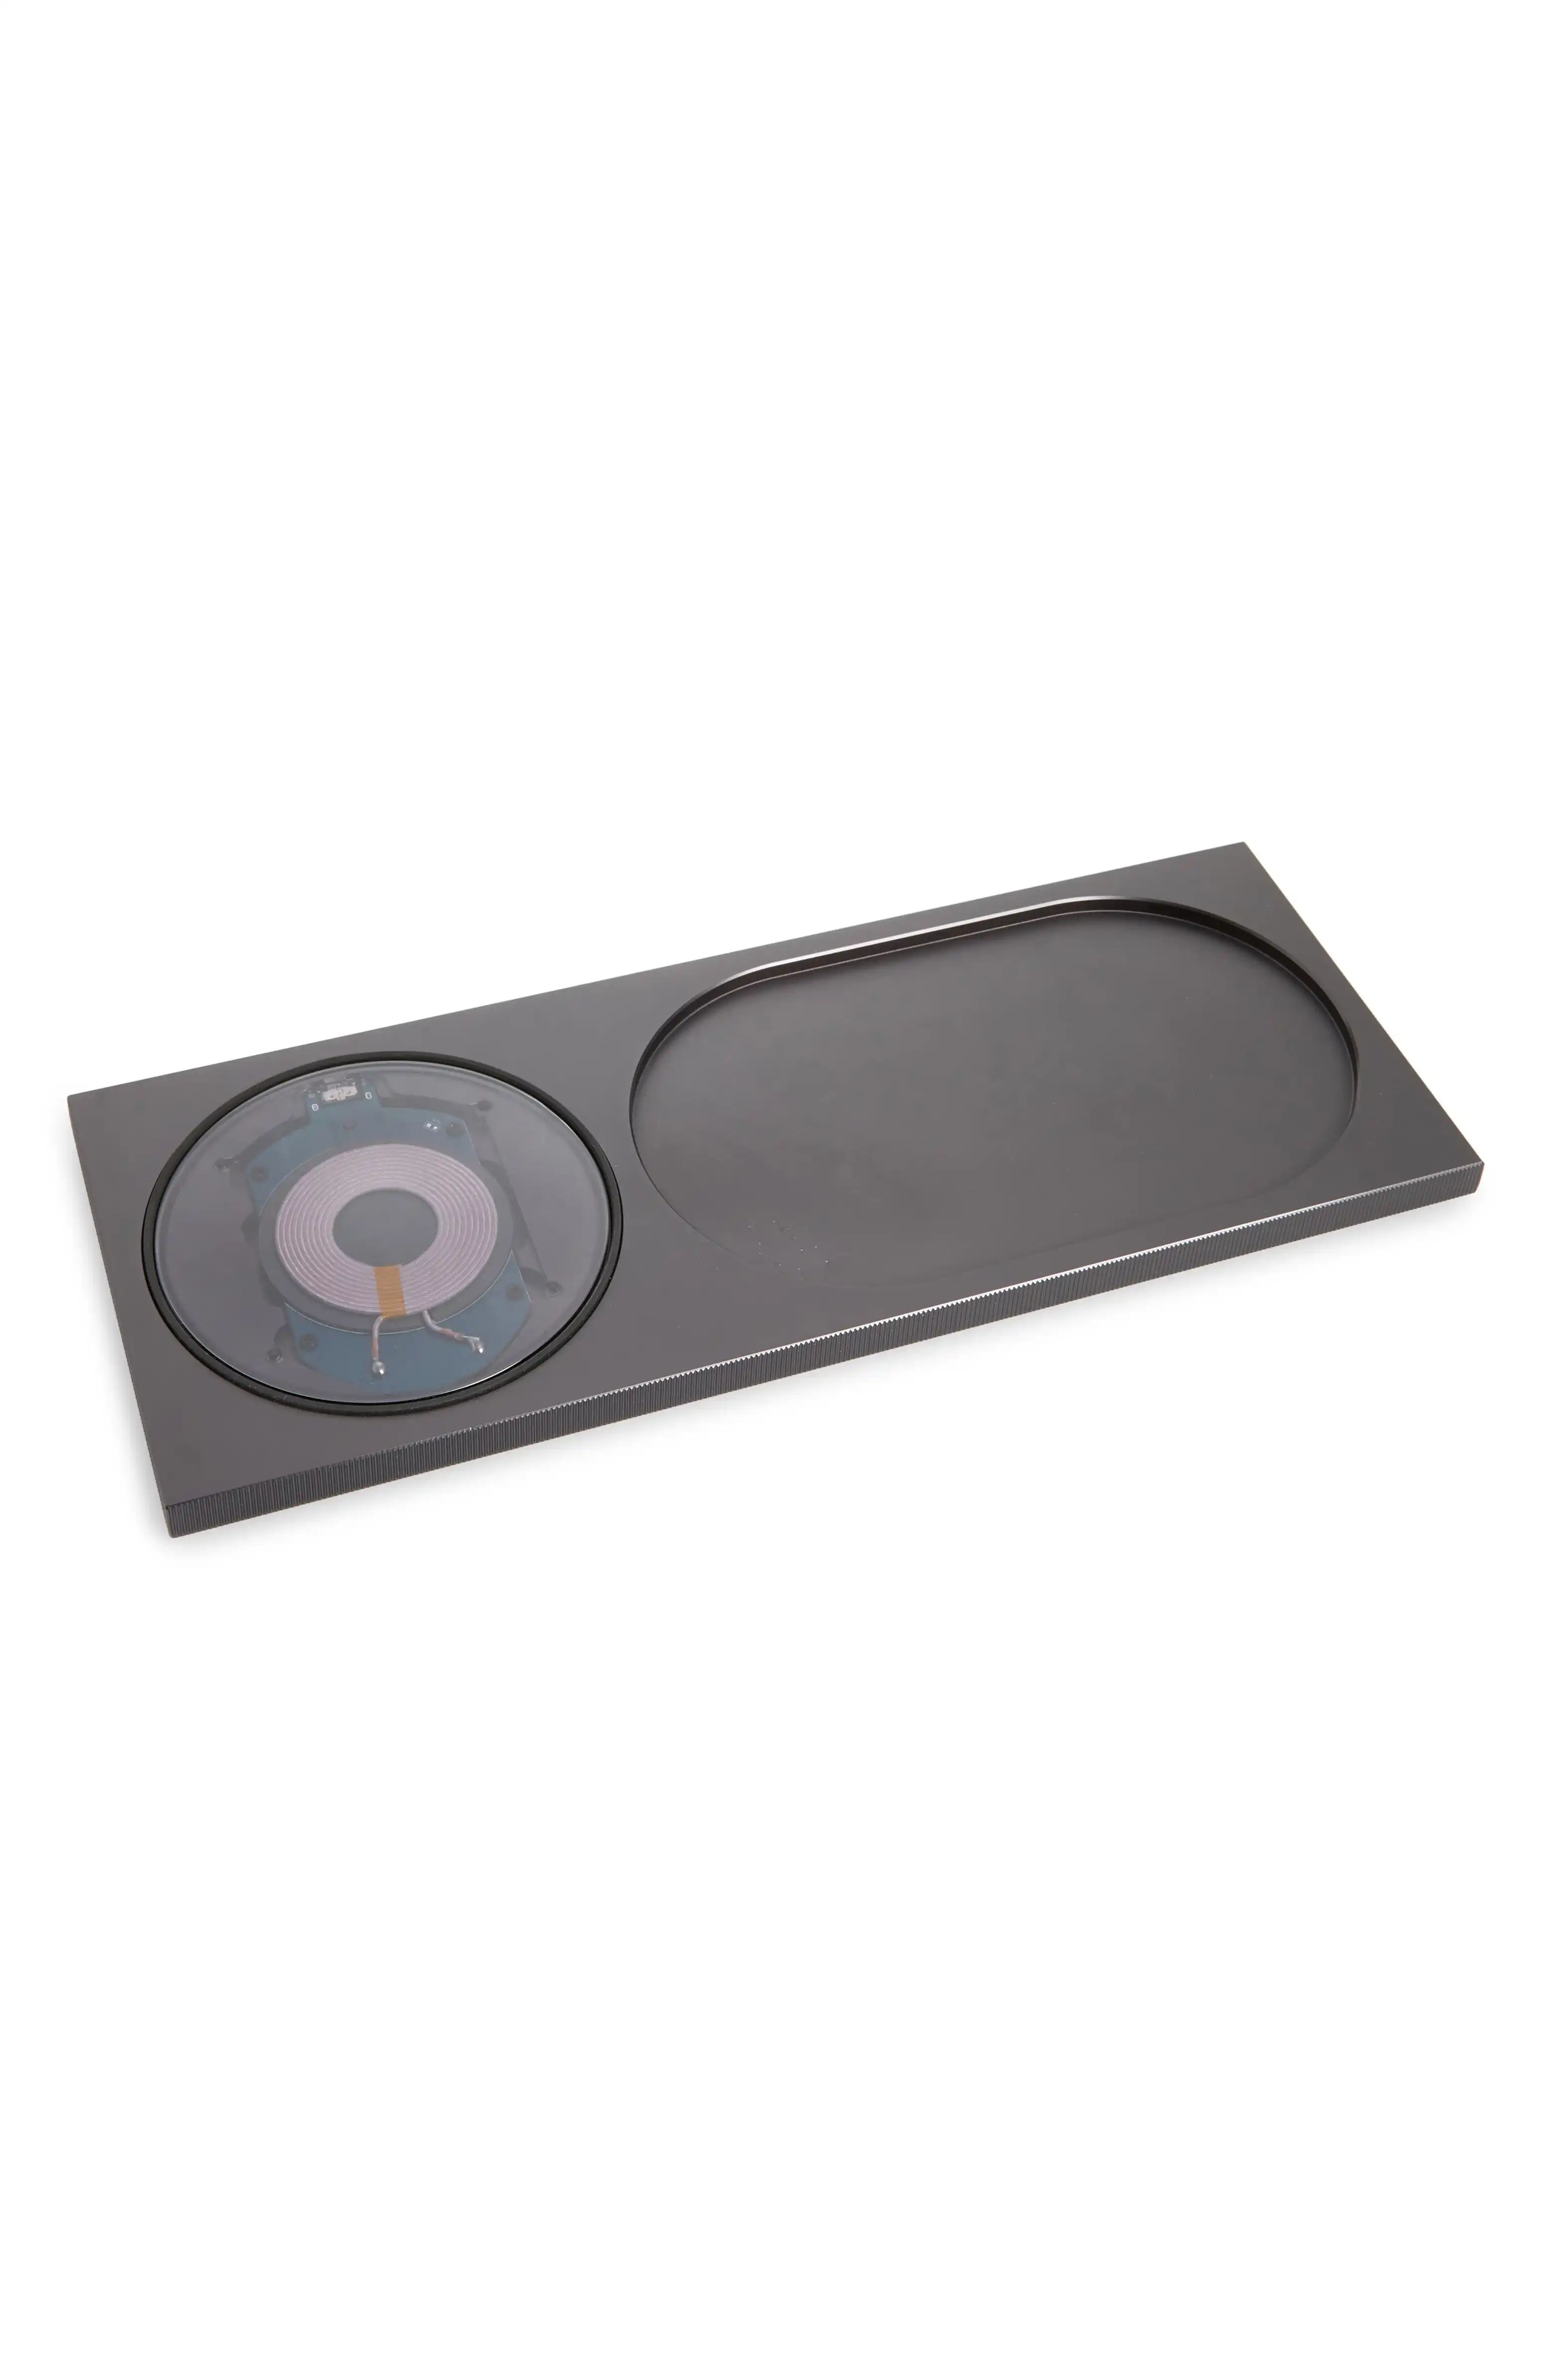 Native Union Block Wireless Charging Station & Valet Tray | Nordstrom | Nordstrom